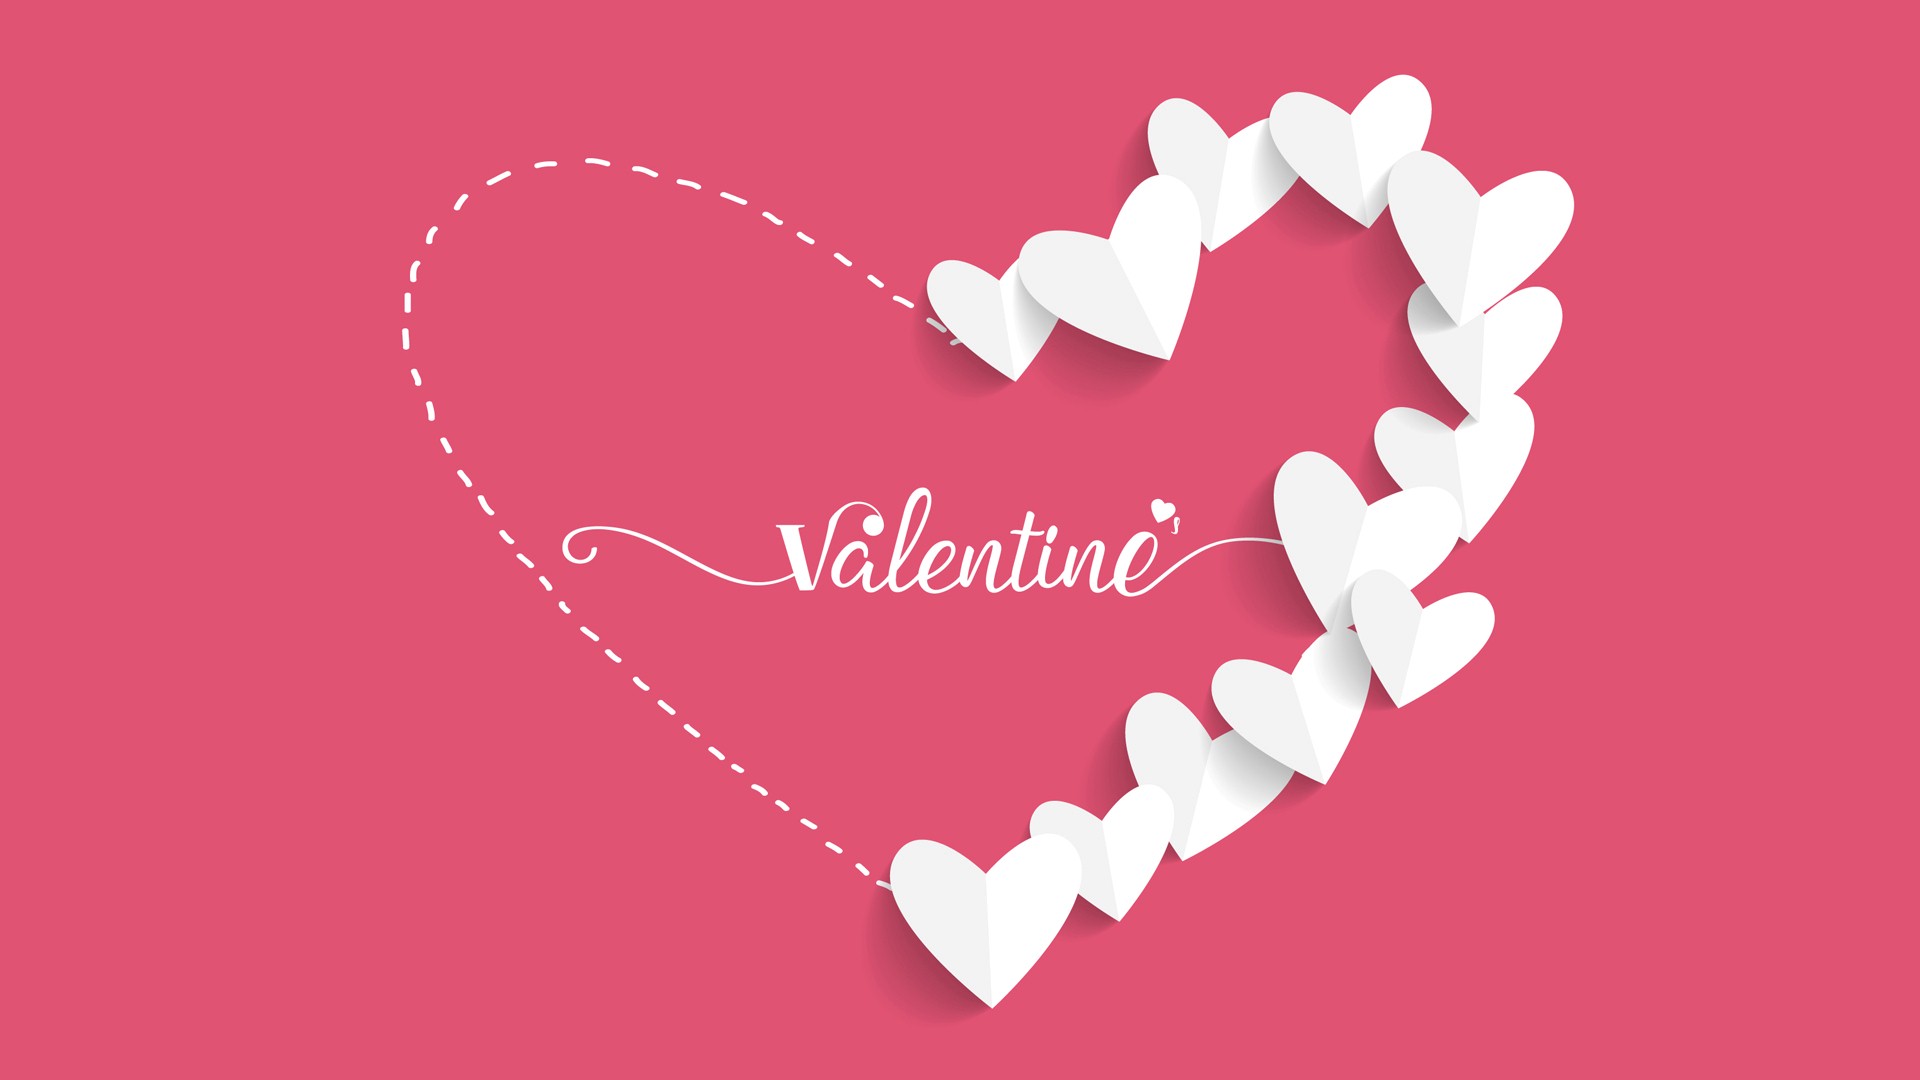 Happy valentines day wallpaper Royalty Free Vector Image